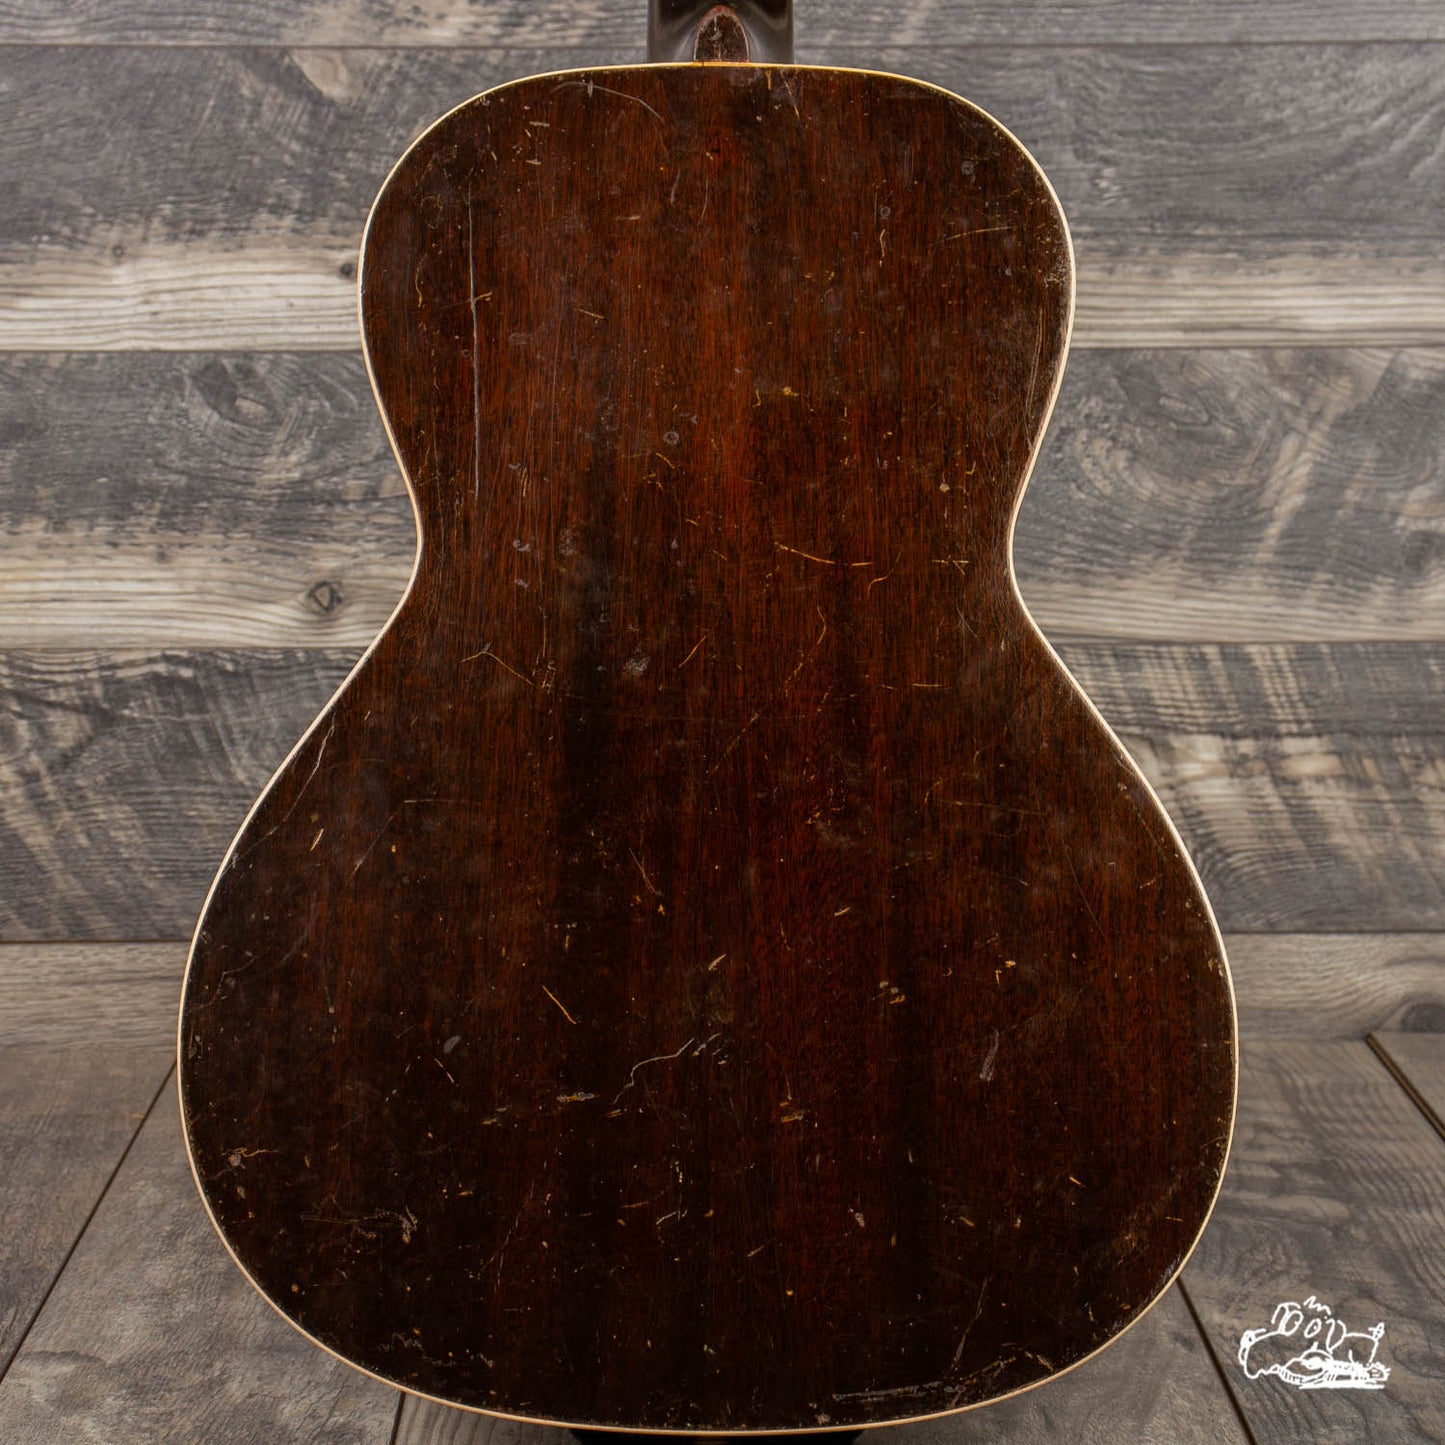 1946 Gibson L-00